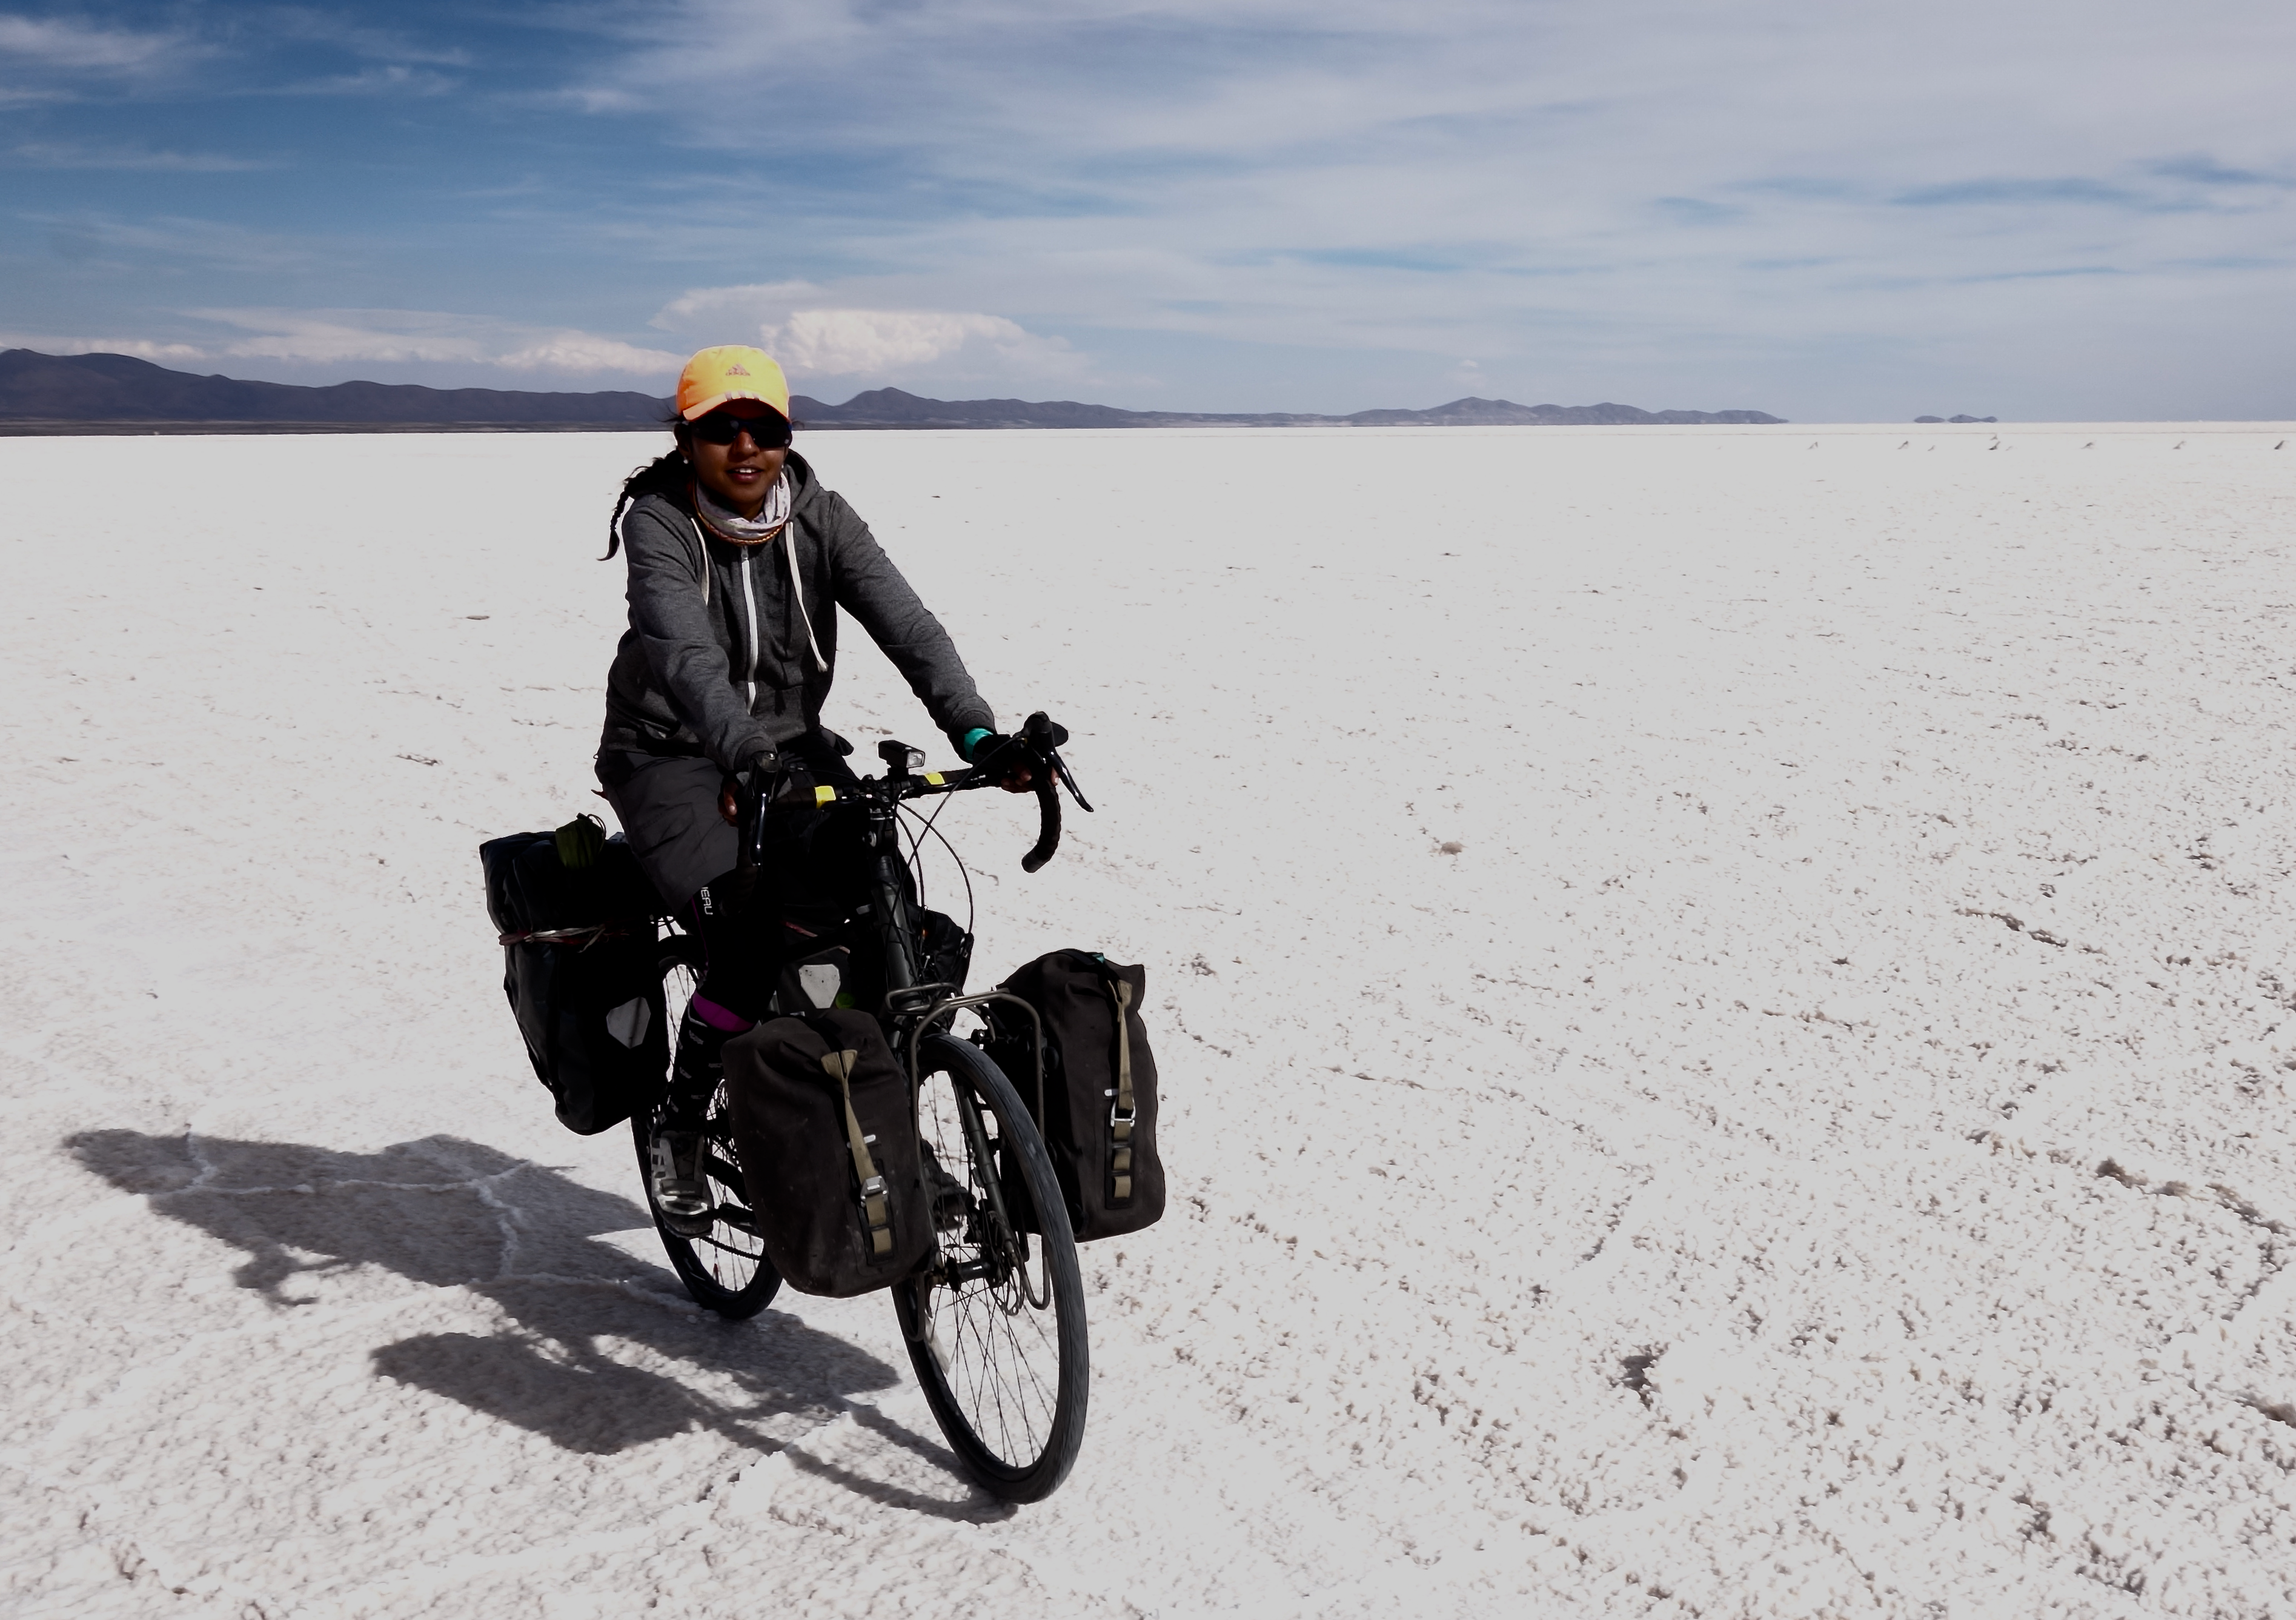 Cycling through the Uyuni Salt Flats in Bolivia, during a 24,000 km bicycle journey from Alaska to Argentina